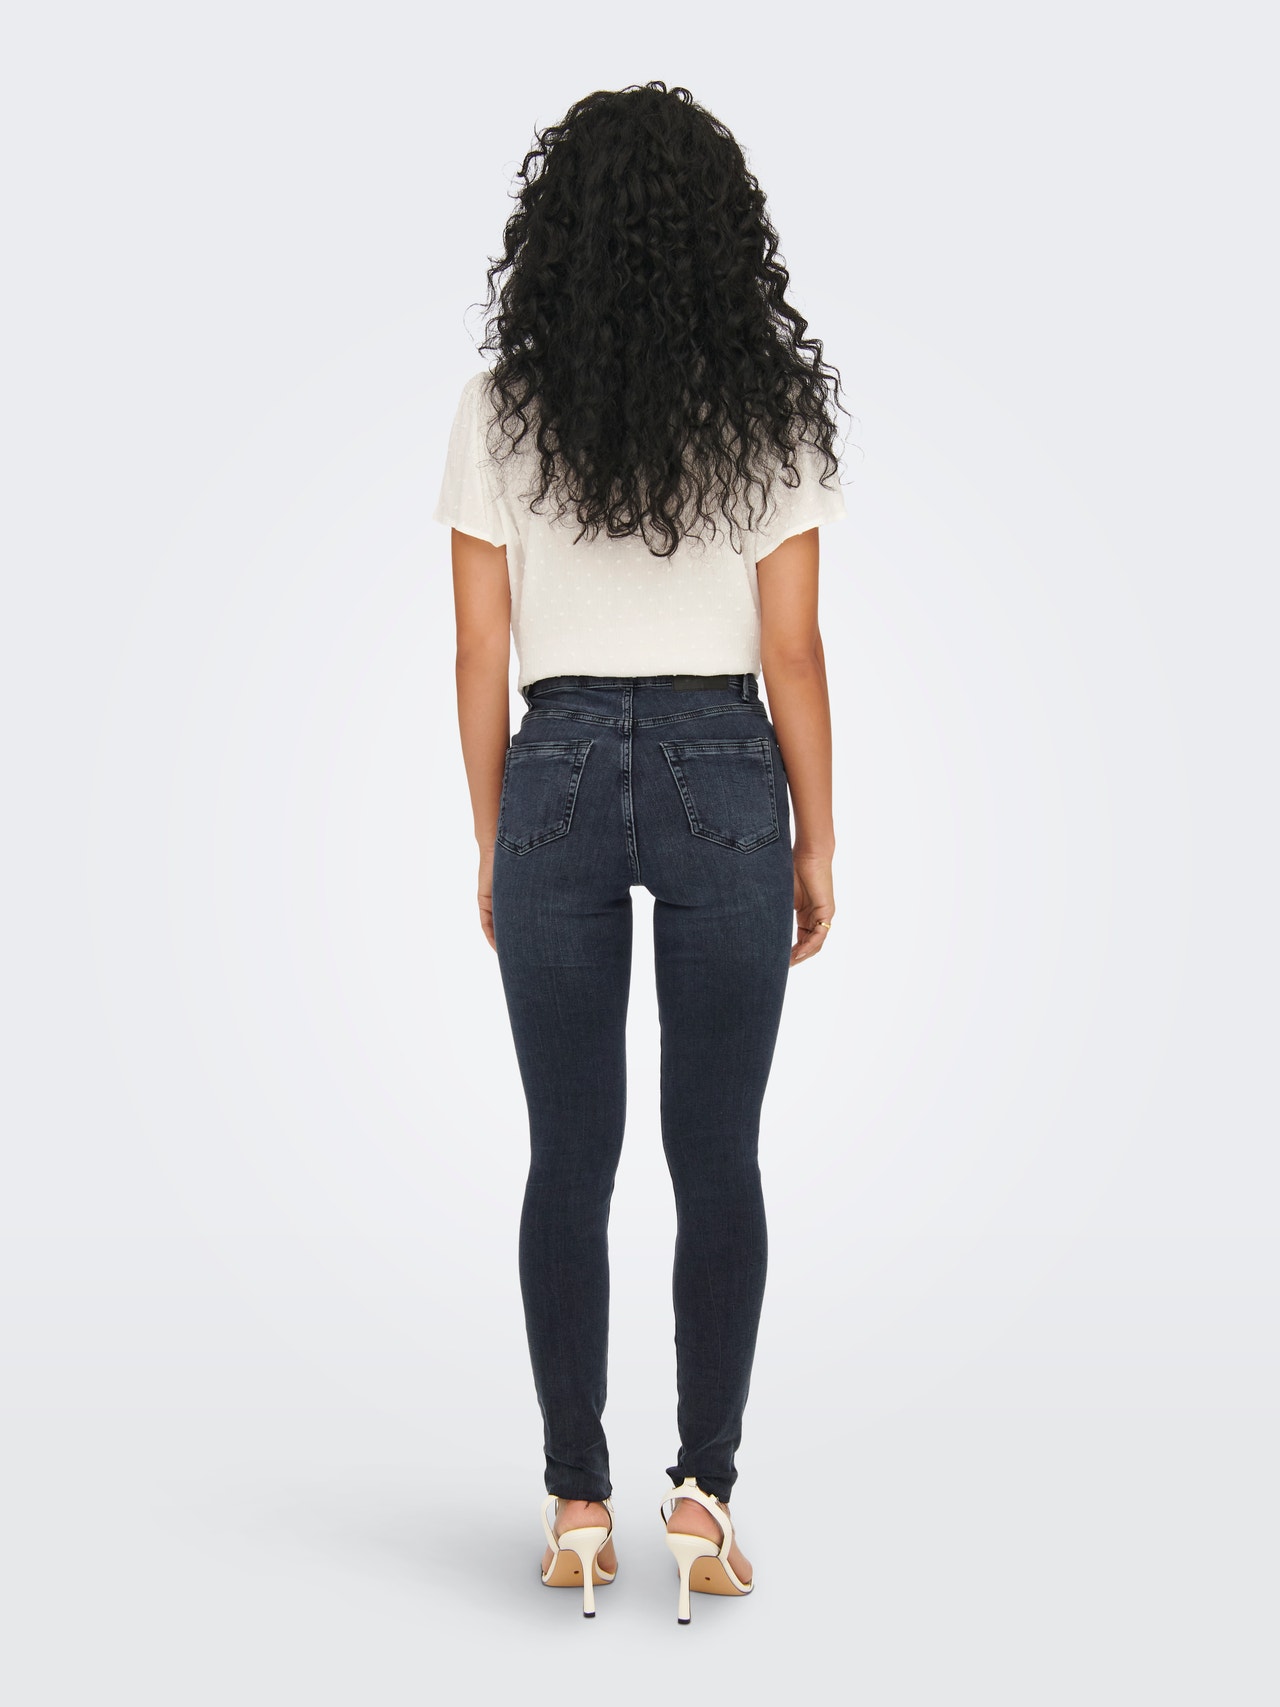 Uni Fit Jeans: High-Rise Skinny Jeans for Women